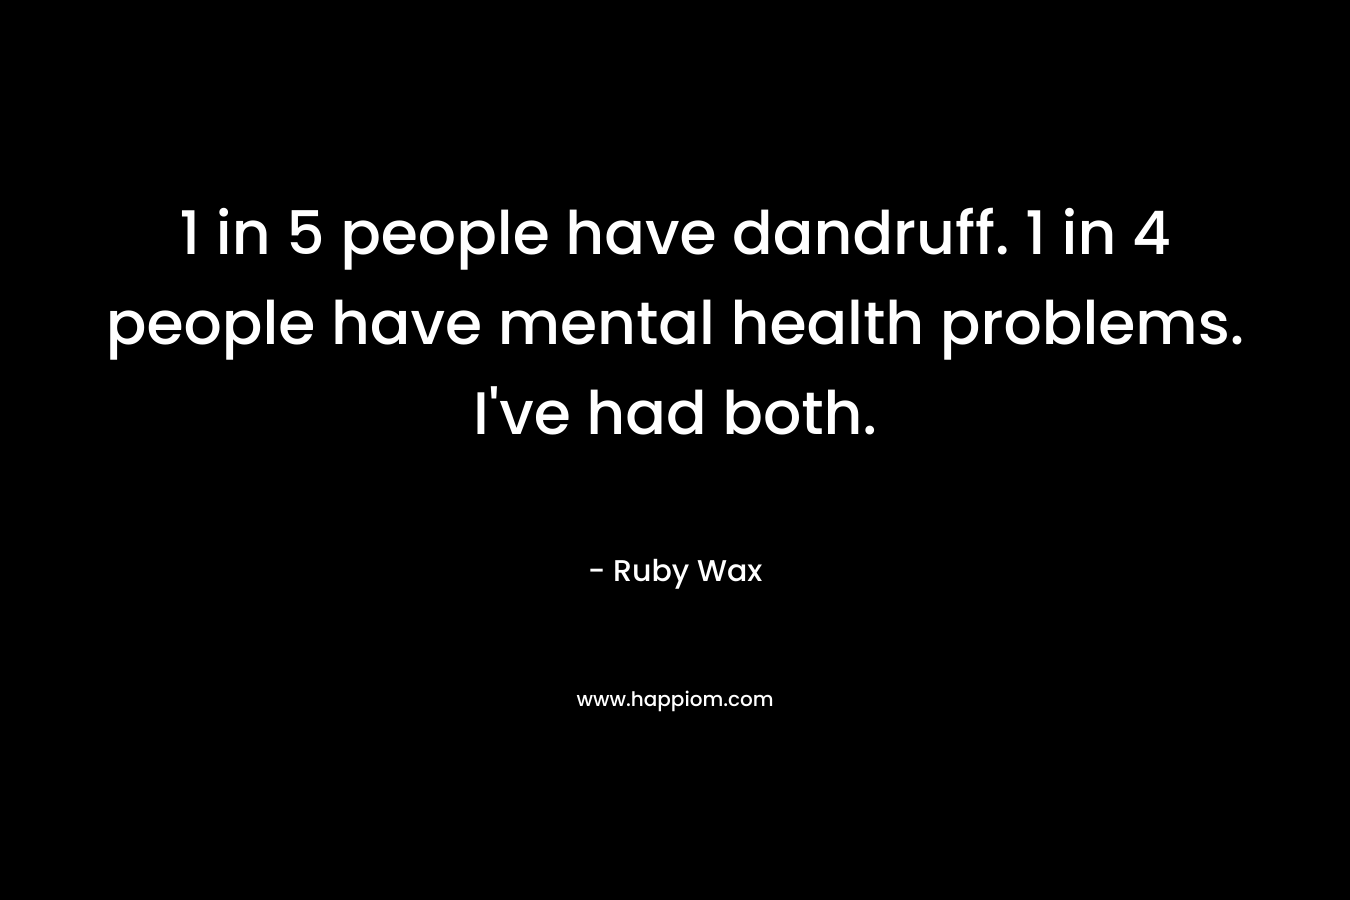 1 in 5 people have dandruff. 1 in 4 people have mental health problems. I've had both.